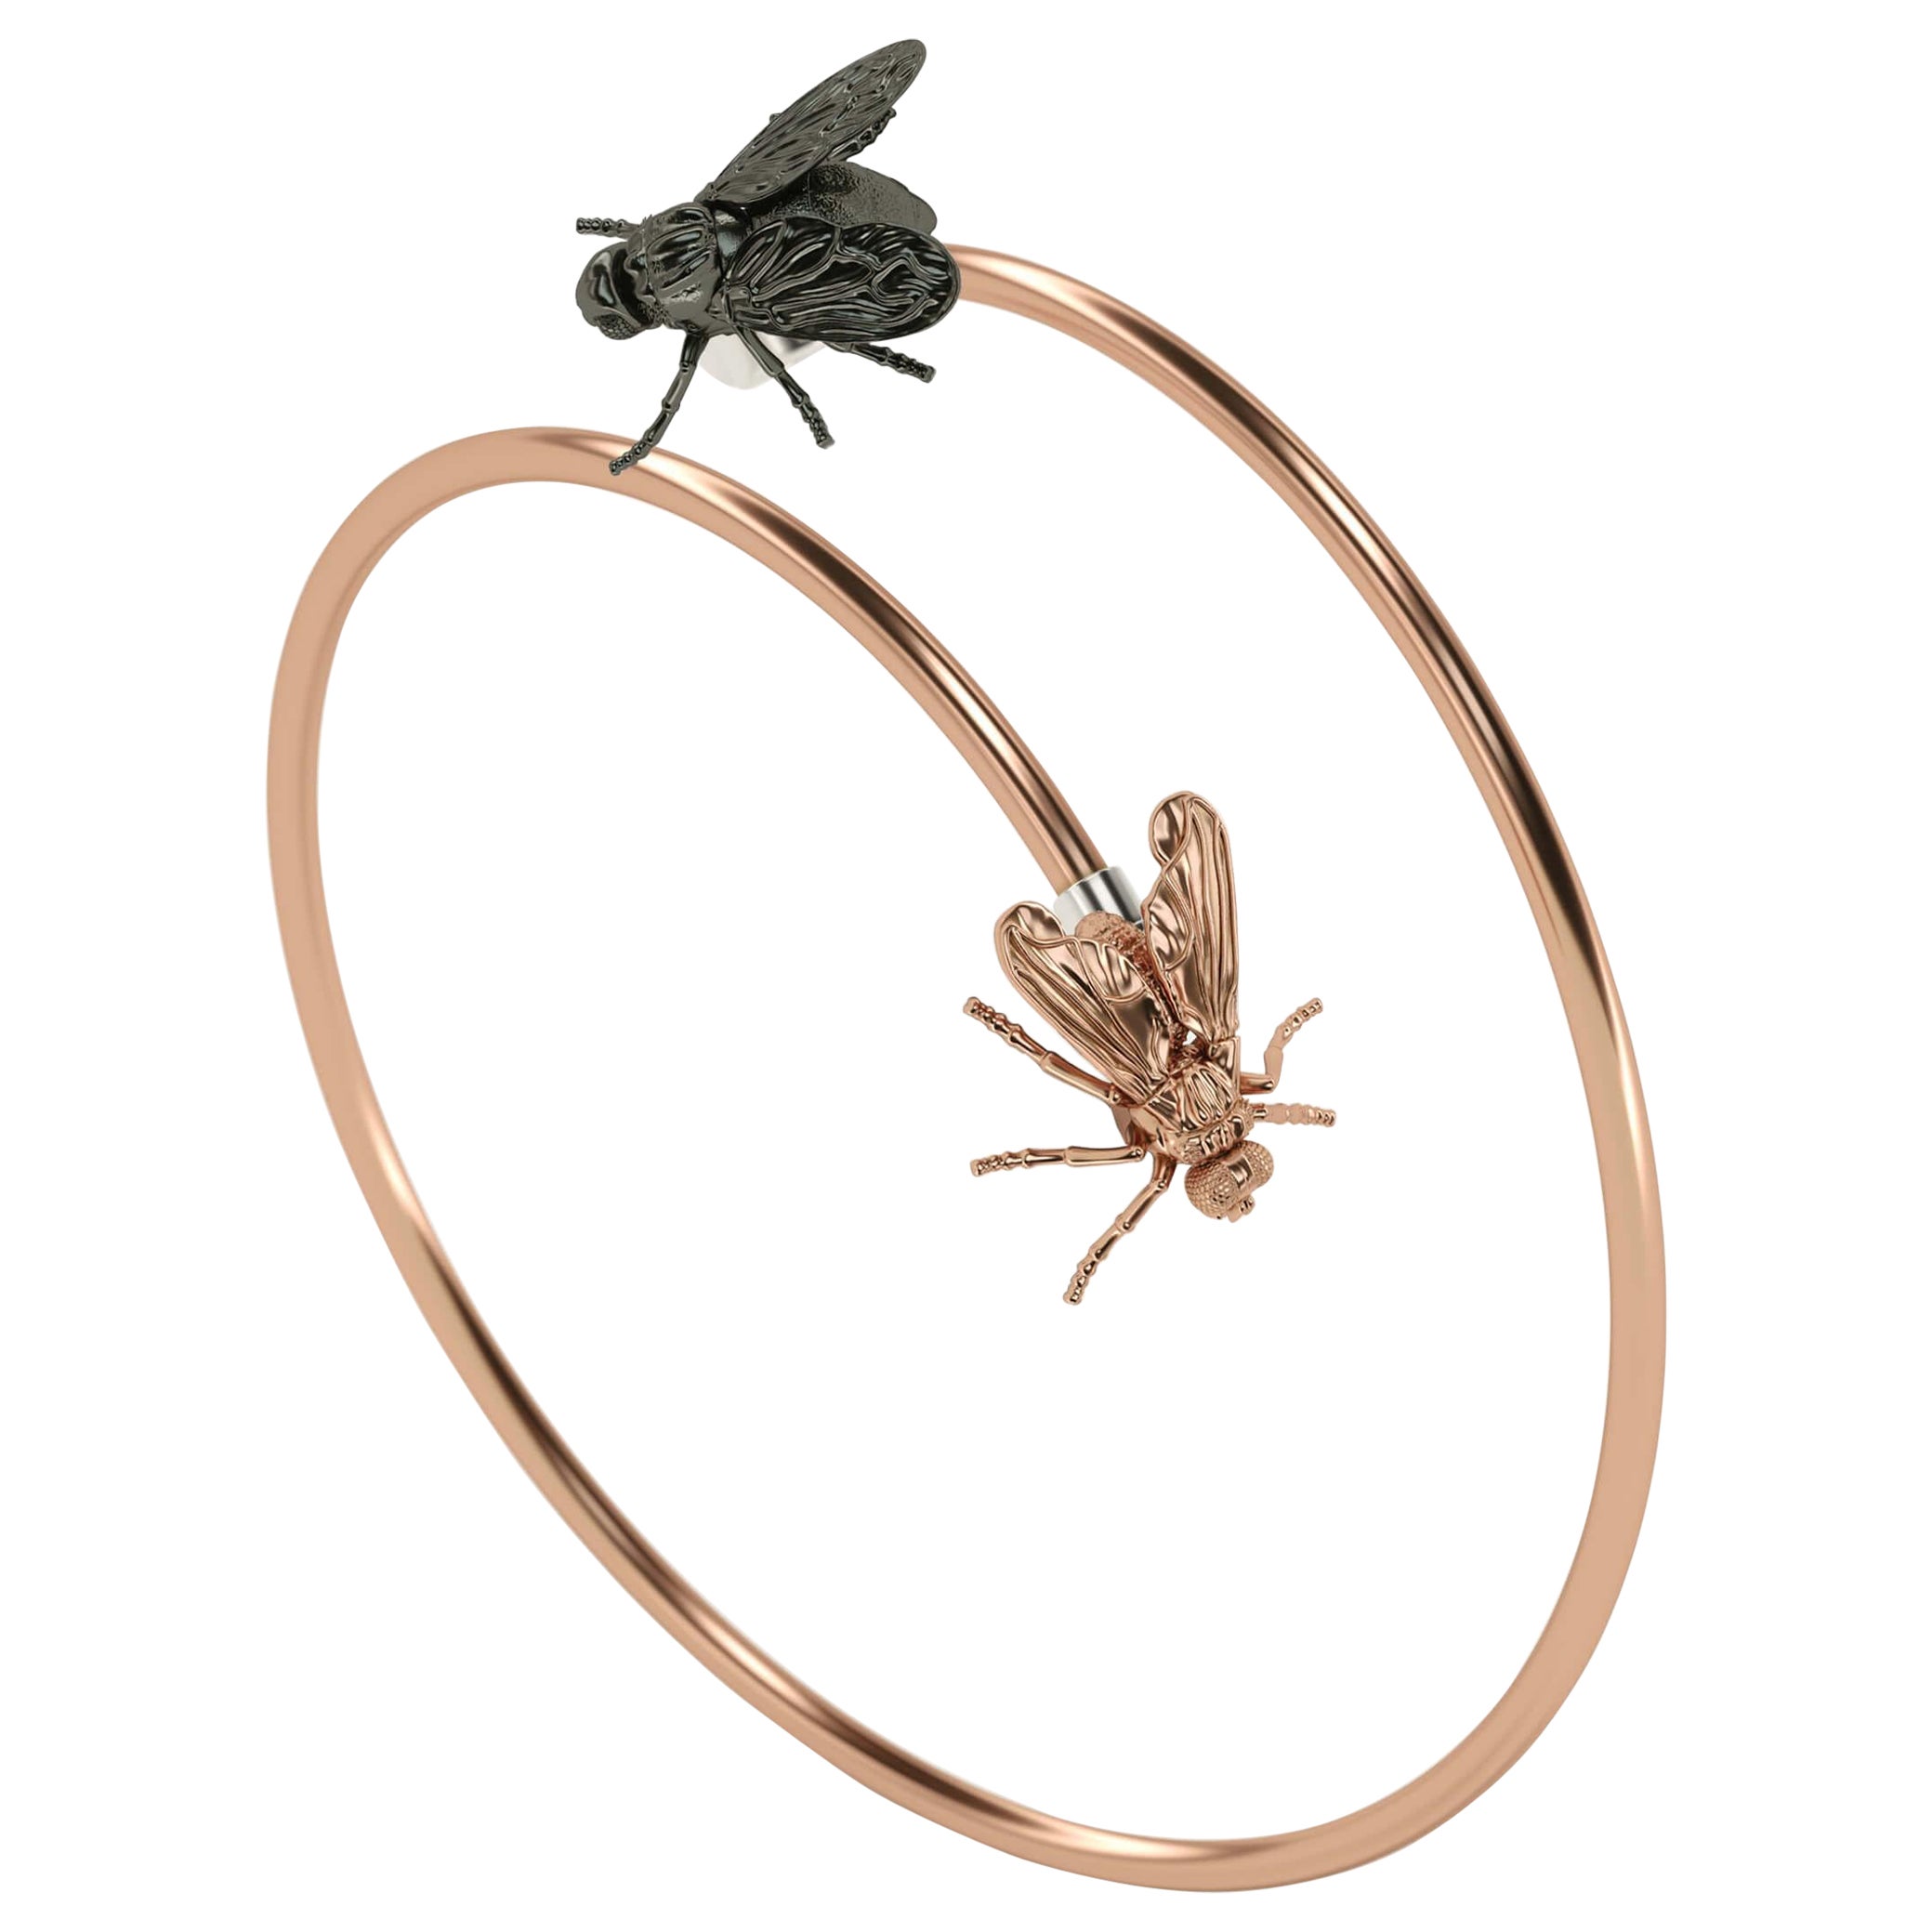 Animalia fashion Gold Bracelet with two flies decorative removable pieces For Sale